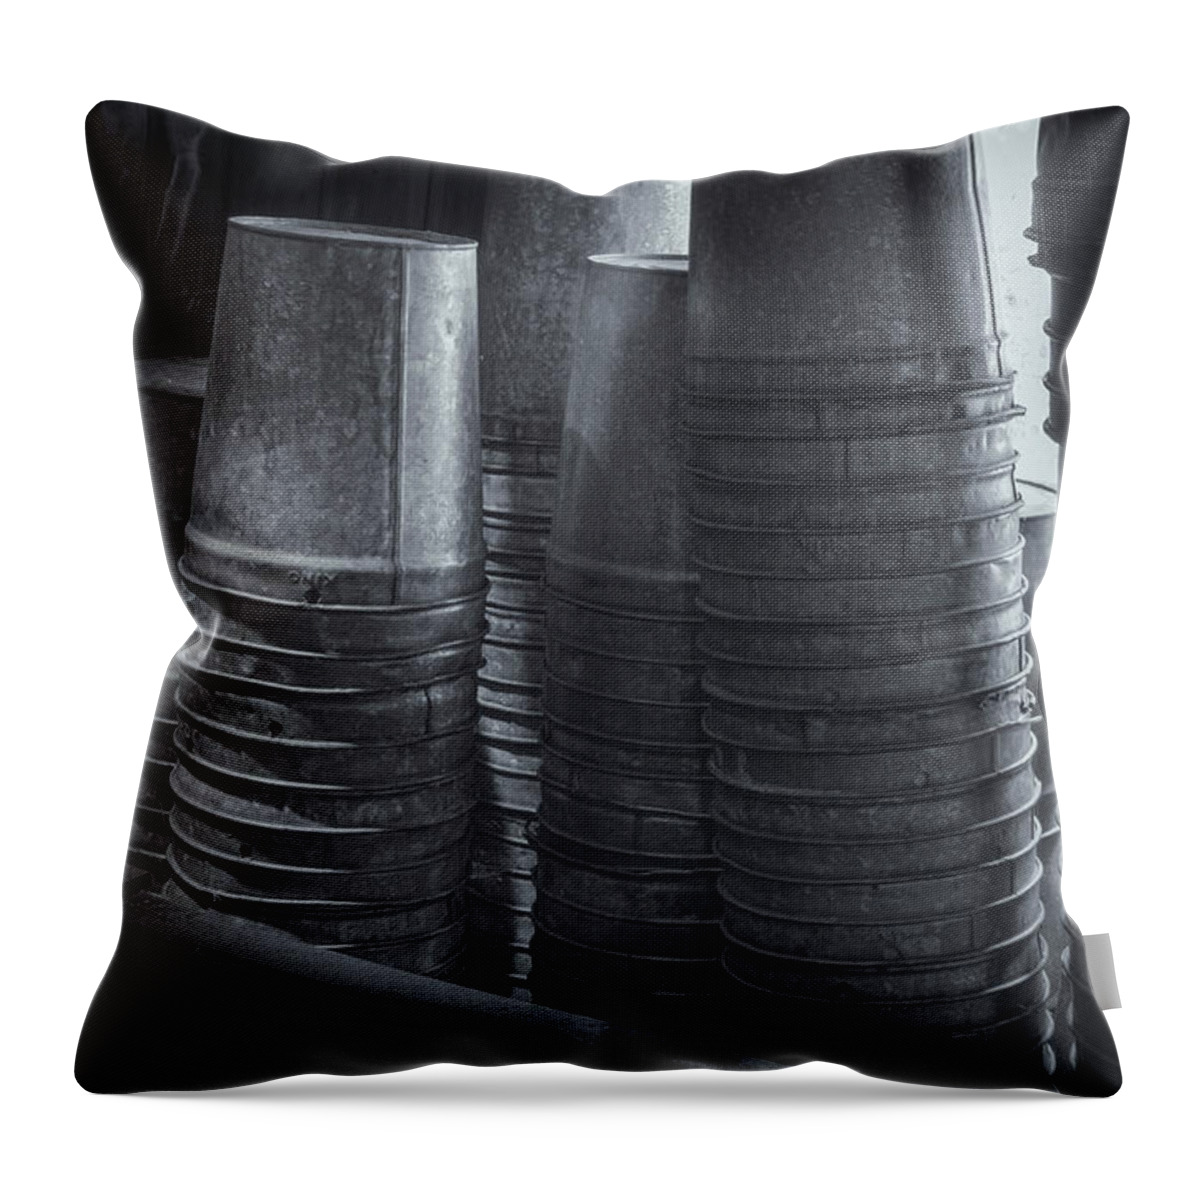 East Dover Vermont Throw Pillow featuring the photograph Maple Syrup Buckets by Tom Singleton